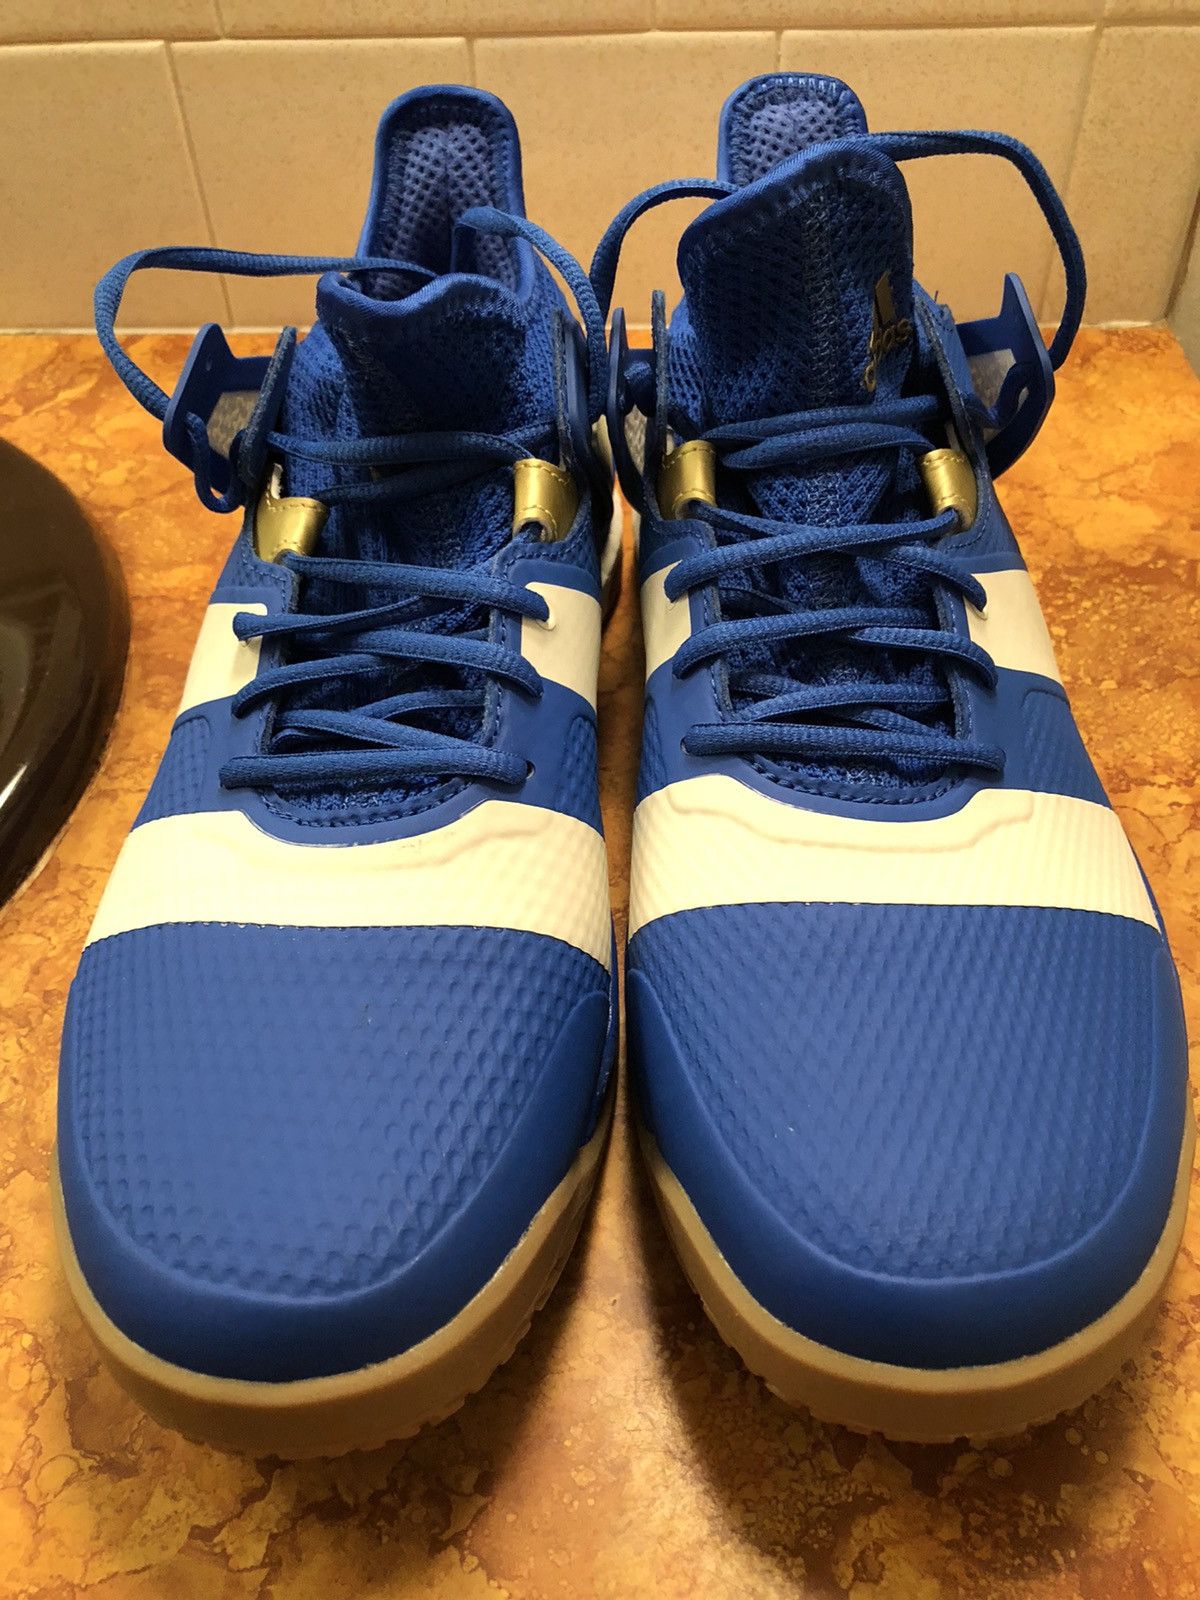 Adidas adidas Stabil X Men's Volleyball Shoes Blue/Gold Size US 12.5 / EU 45-46 - 1 Preview